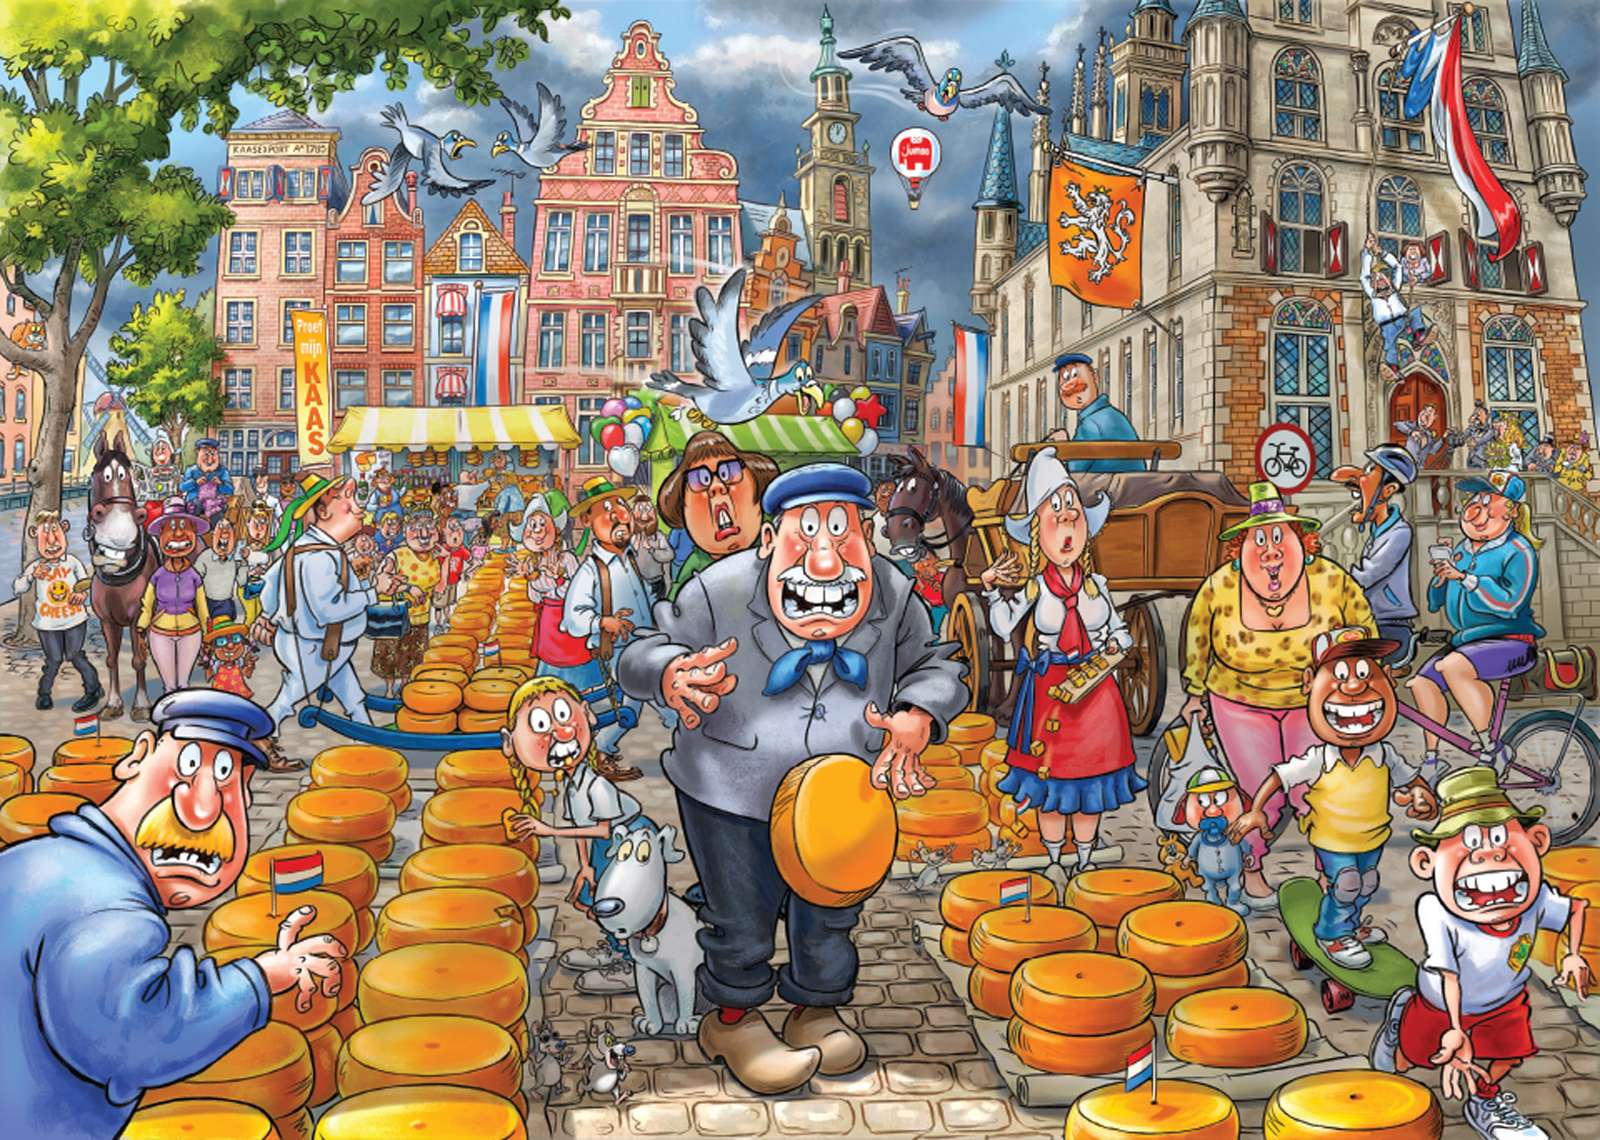 Wasgij - The Cheese Market puzzle online from photo